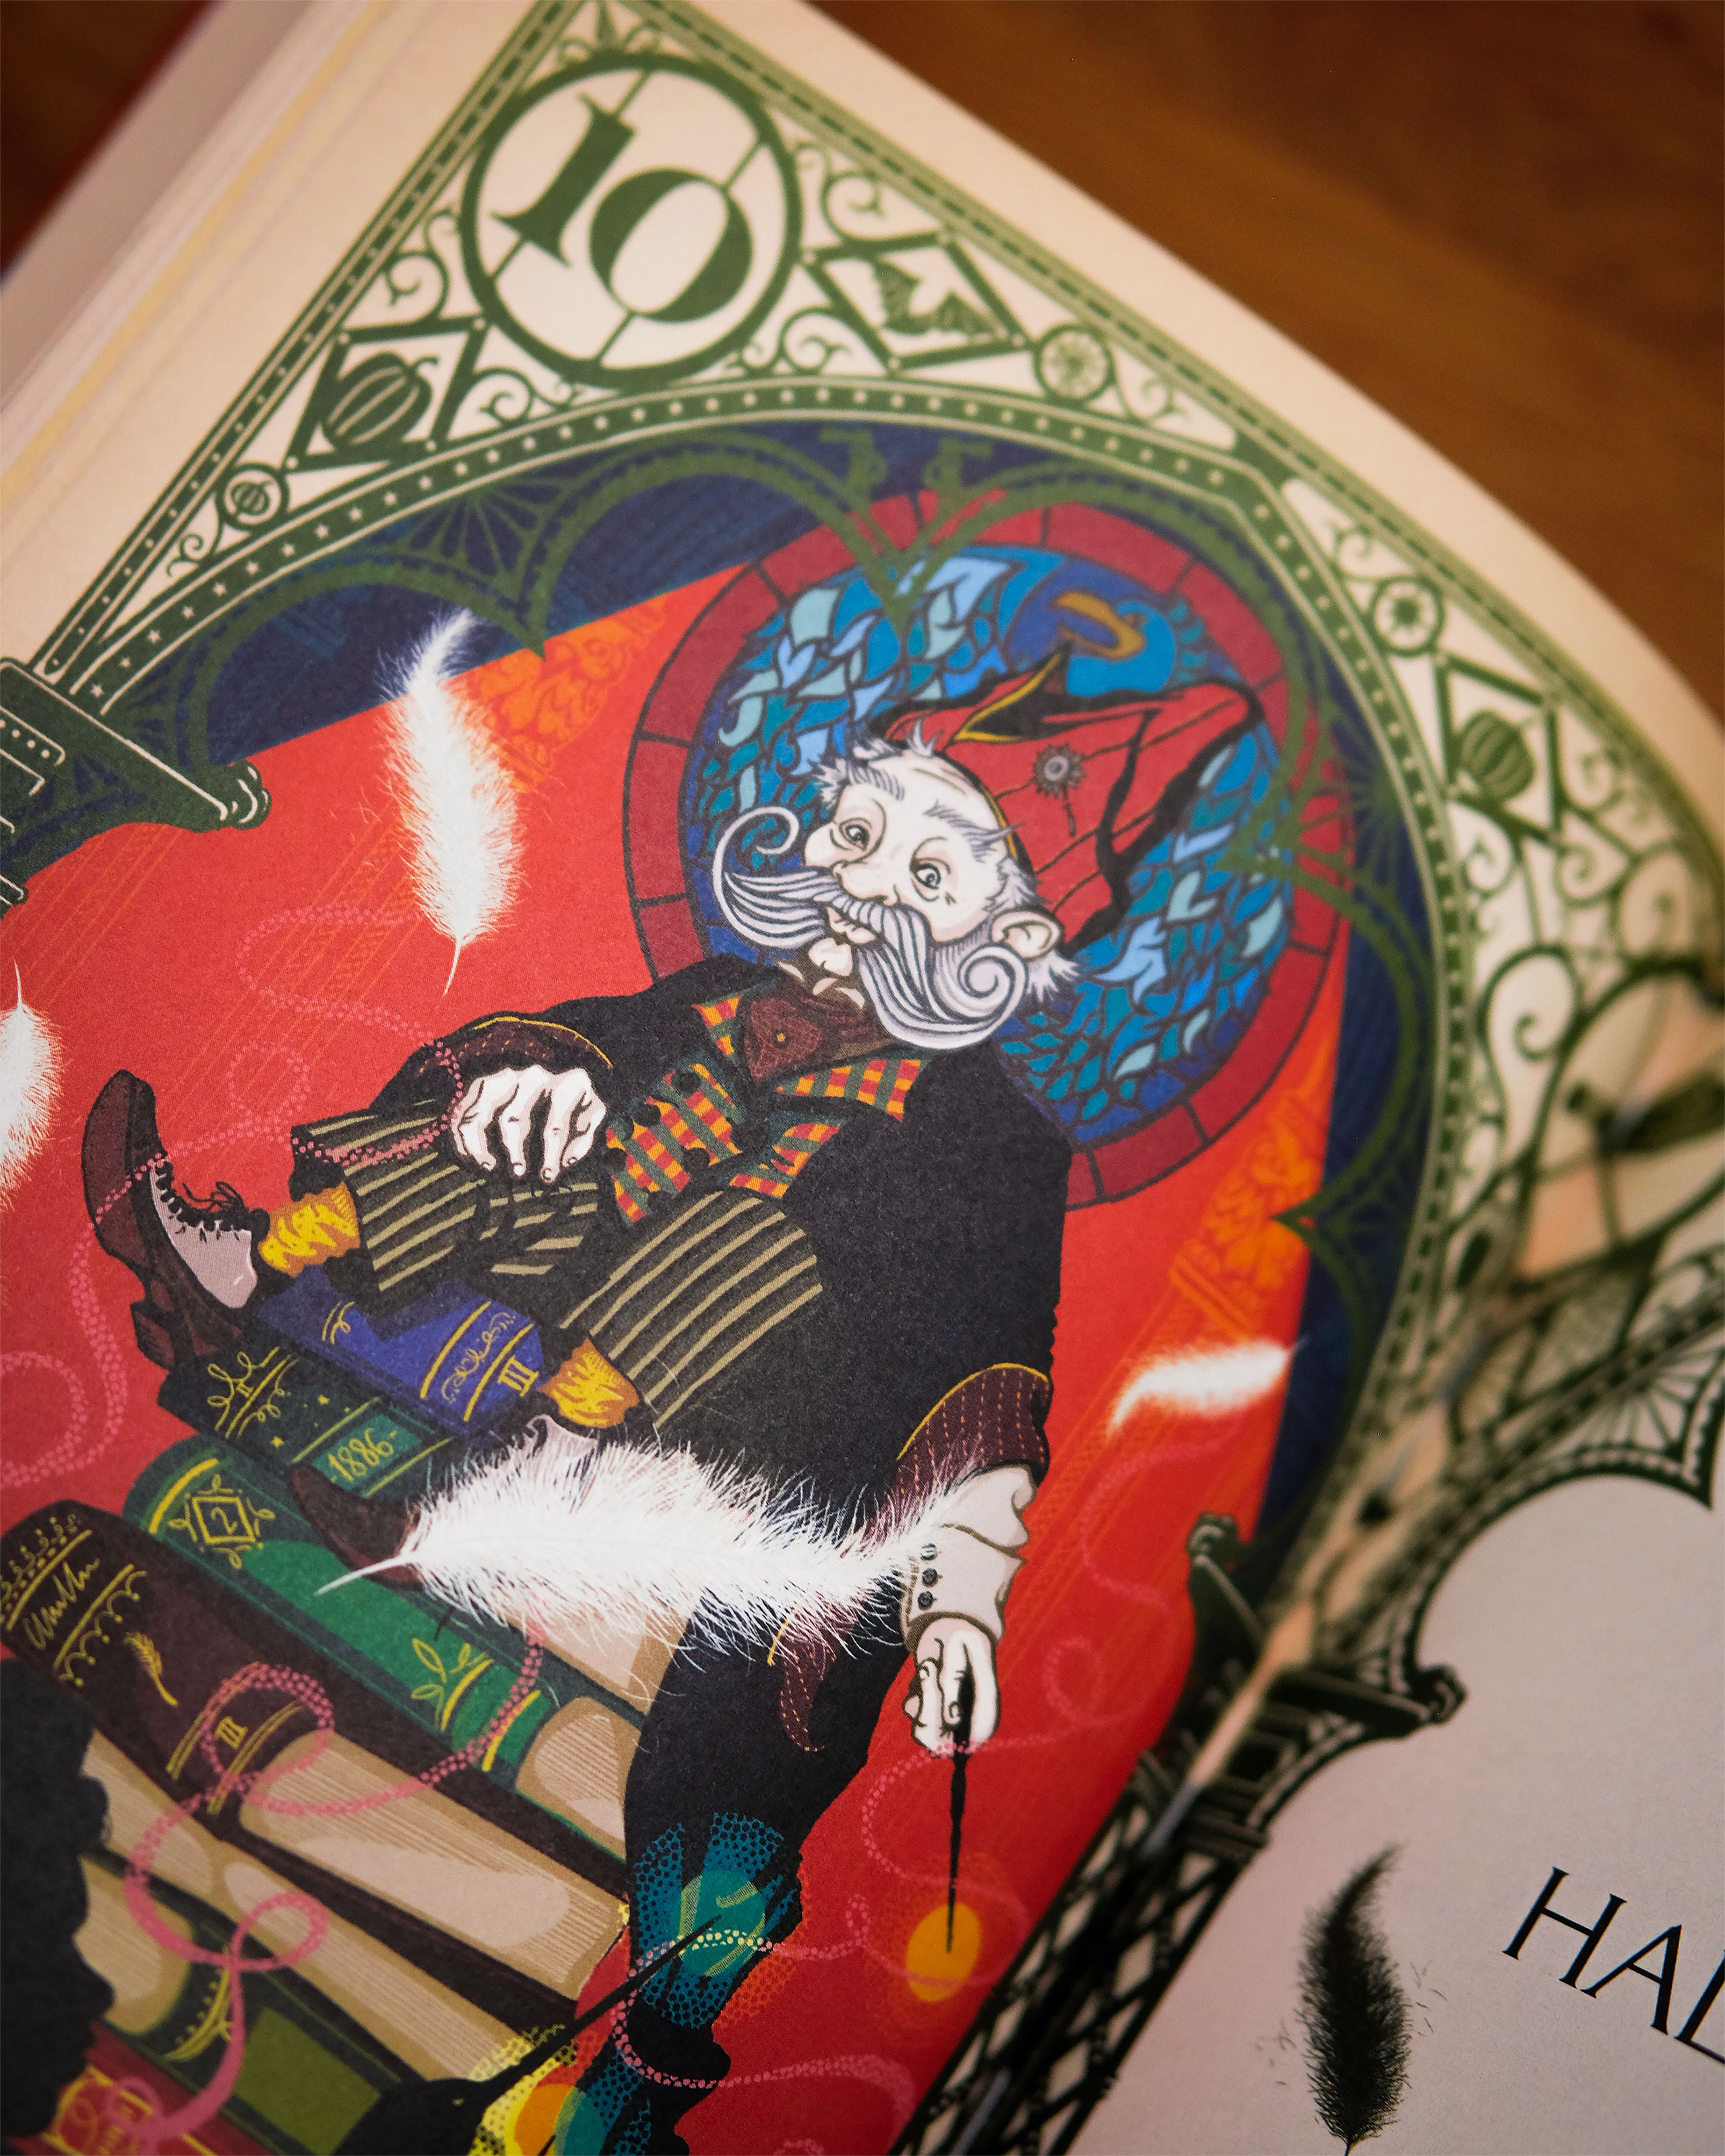 Harry Potter and the Philosopher's Stone - MinaLima Edition